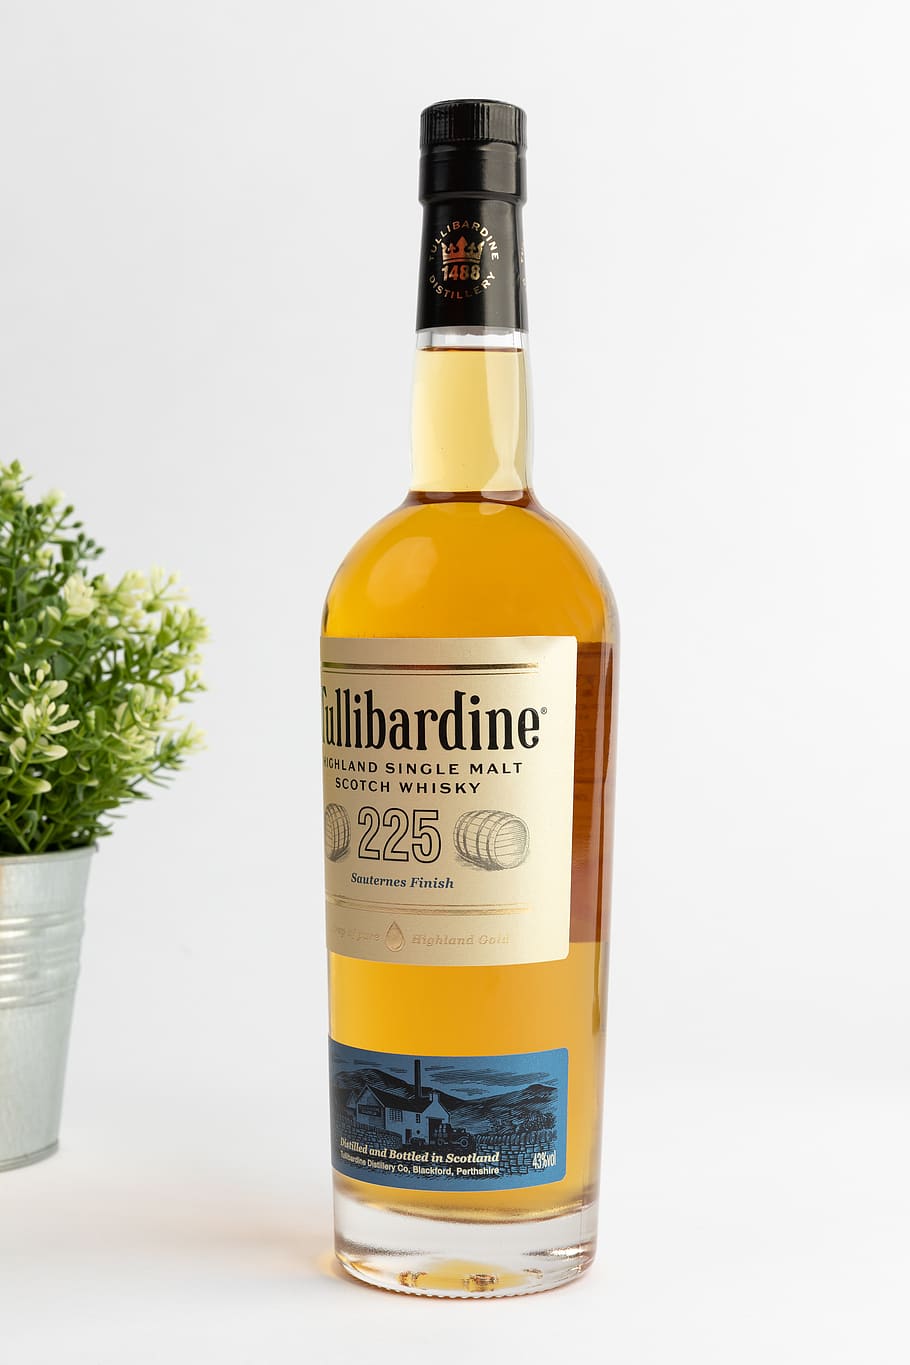 Collibardine scotch whisky, bottle, container, food and drink